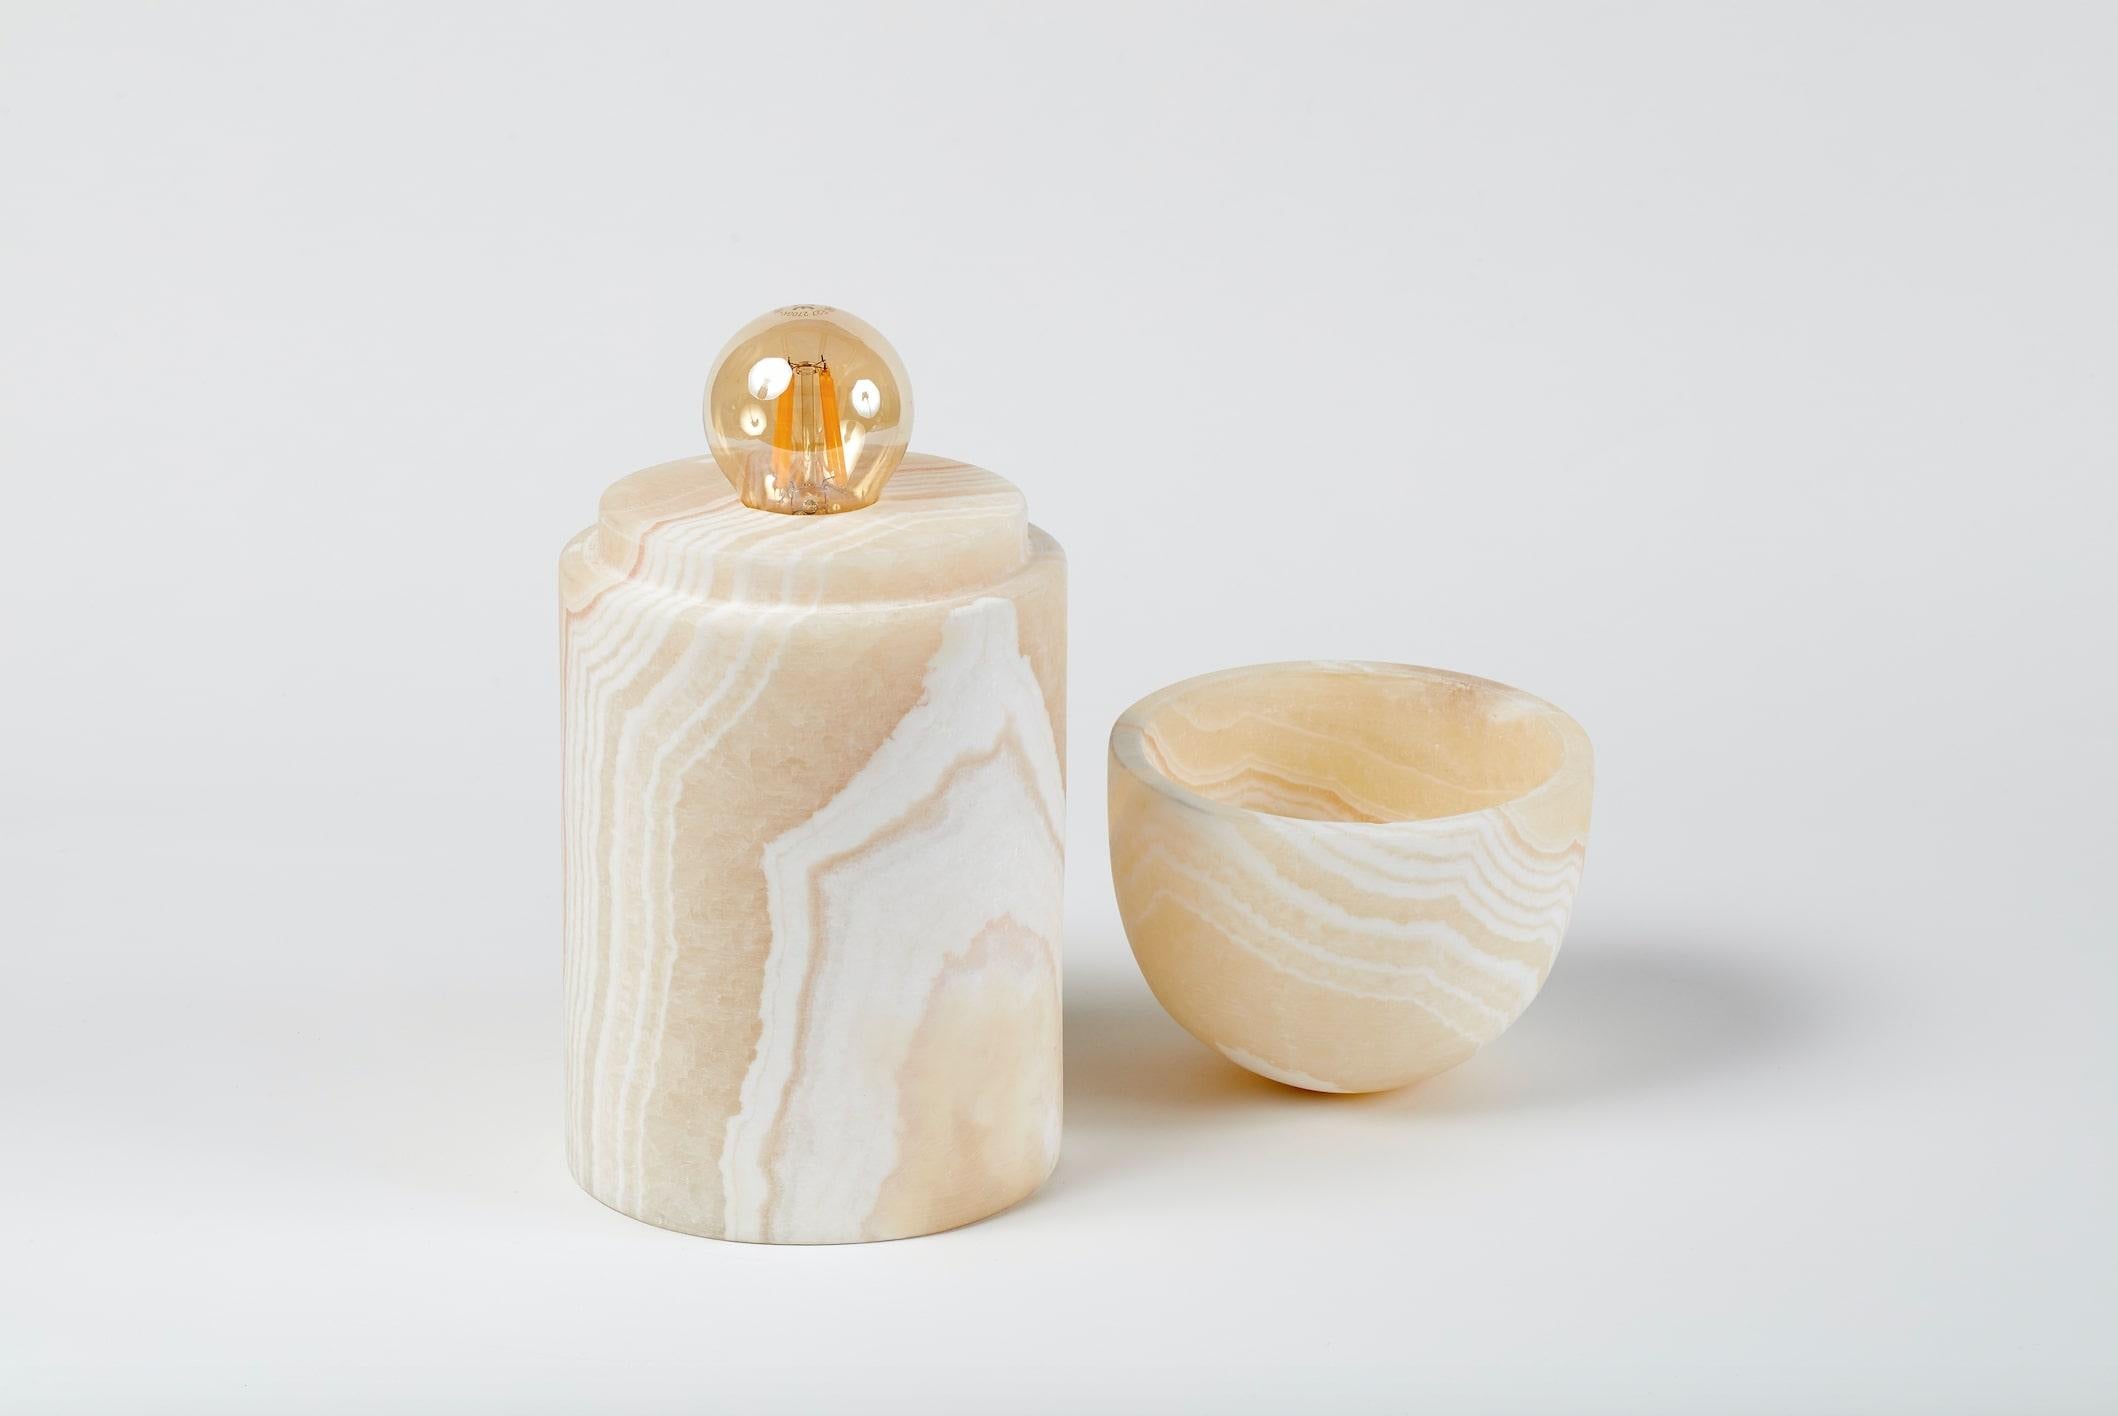 Of Egyptian/Lebanese roots, Omar Chakil developed the series, volutes, made of unvarnished, untreated, raw Egyptian alabaster which he calls Pharaonic alabaster to differentiate it from other kinds of onyx marbles. Launched during Beirut Design Fair